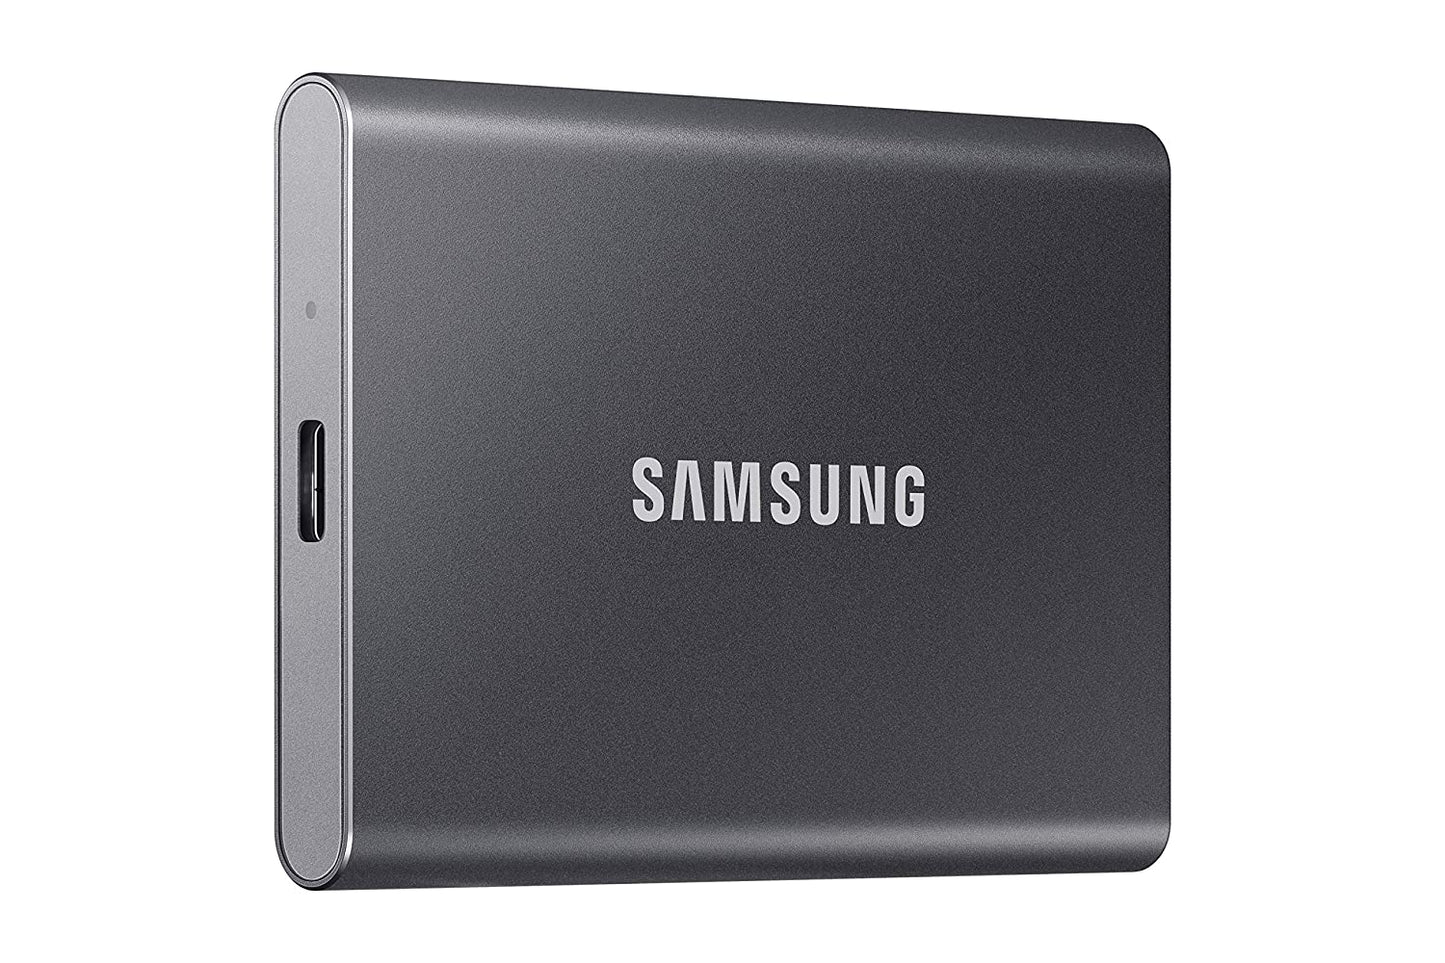 Samsung T7 500GB Up to 1,050MB/s USB 3.2 Gen 2 (10Gbps, Type-C) External Solid State Drive (Portable SSD)